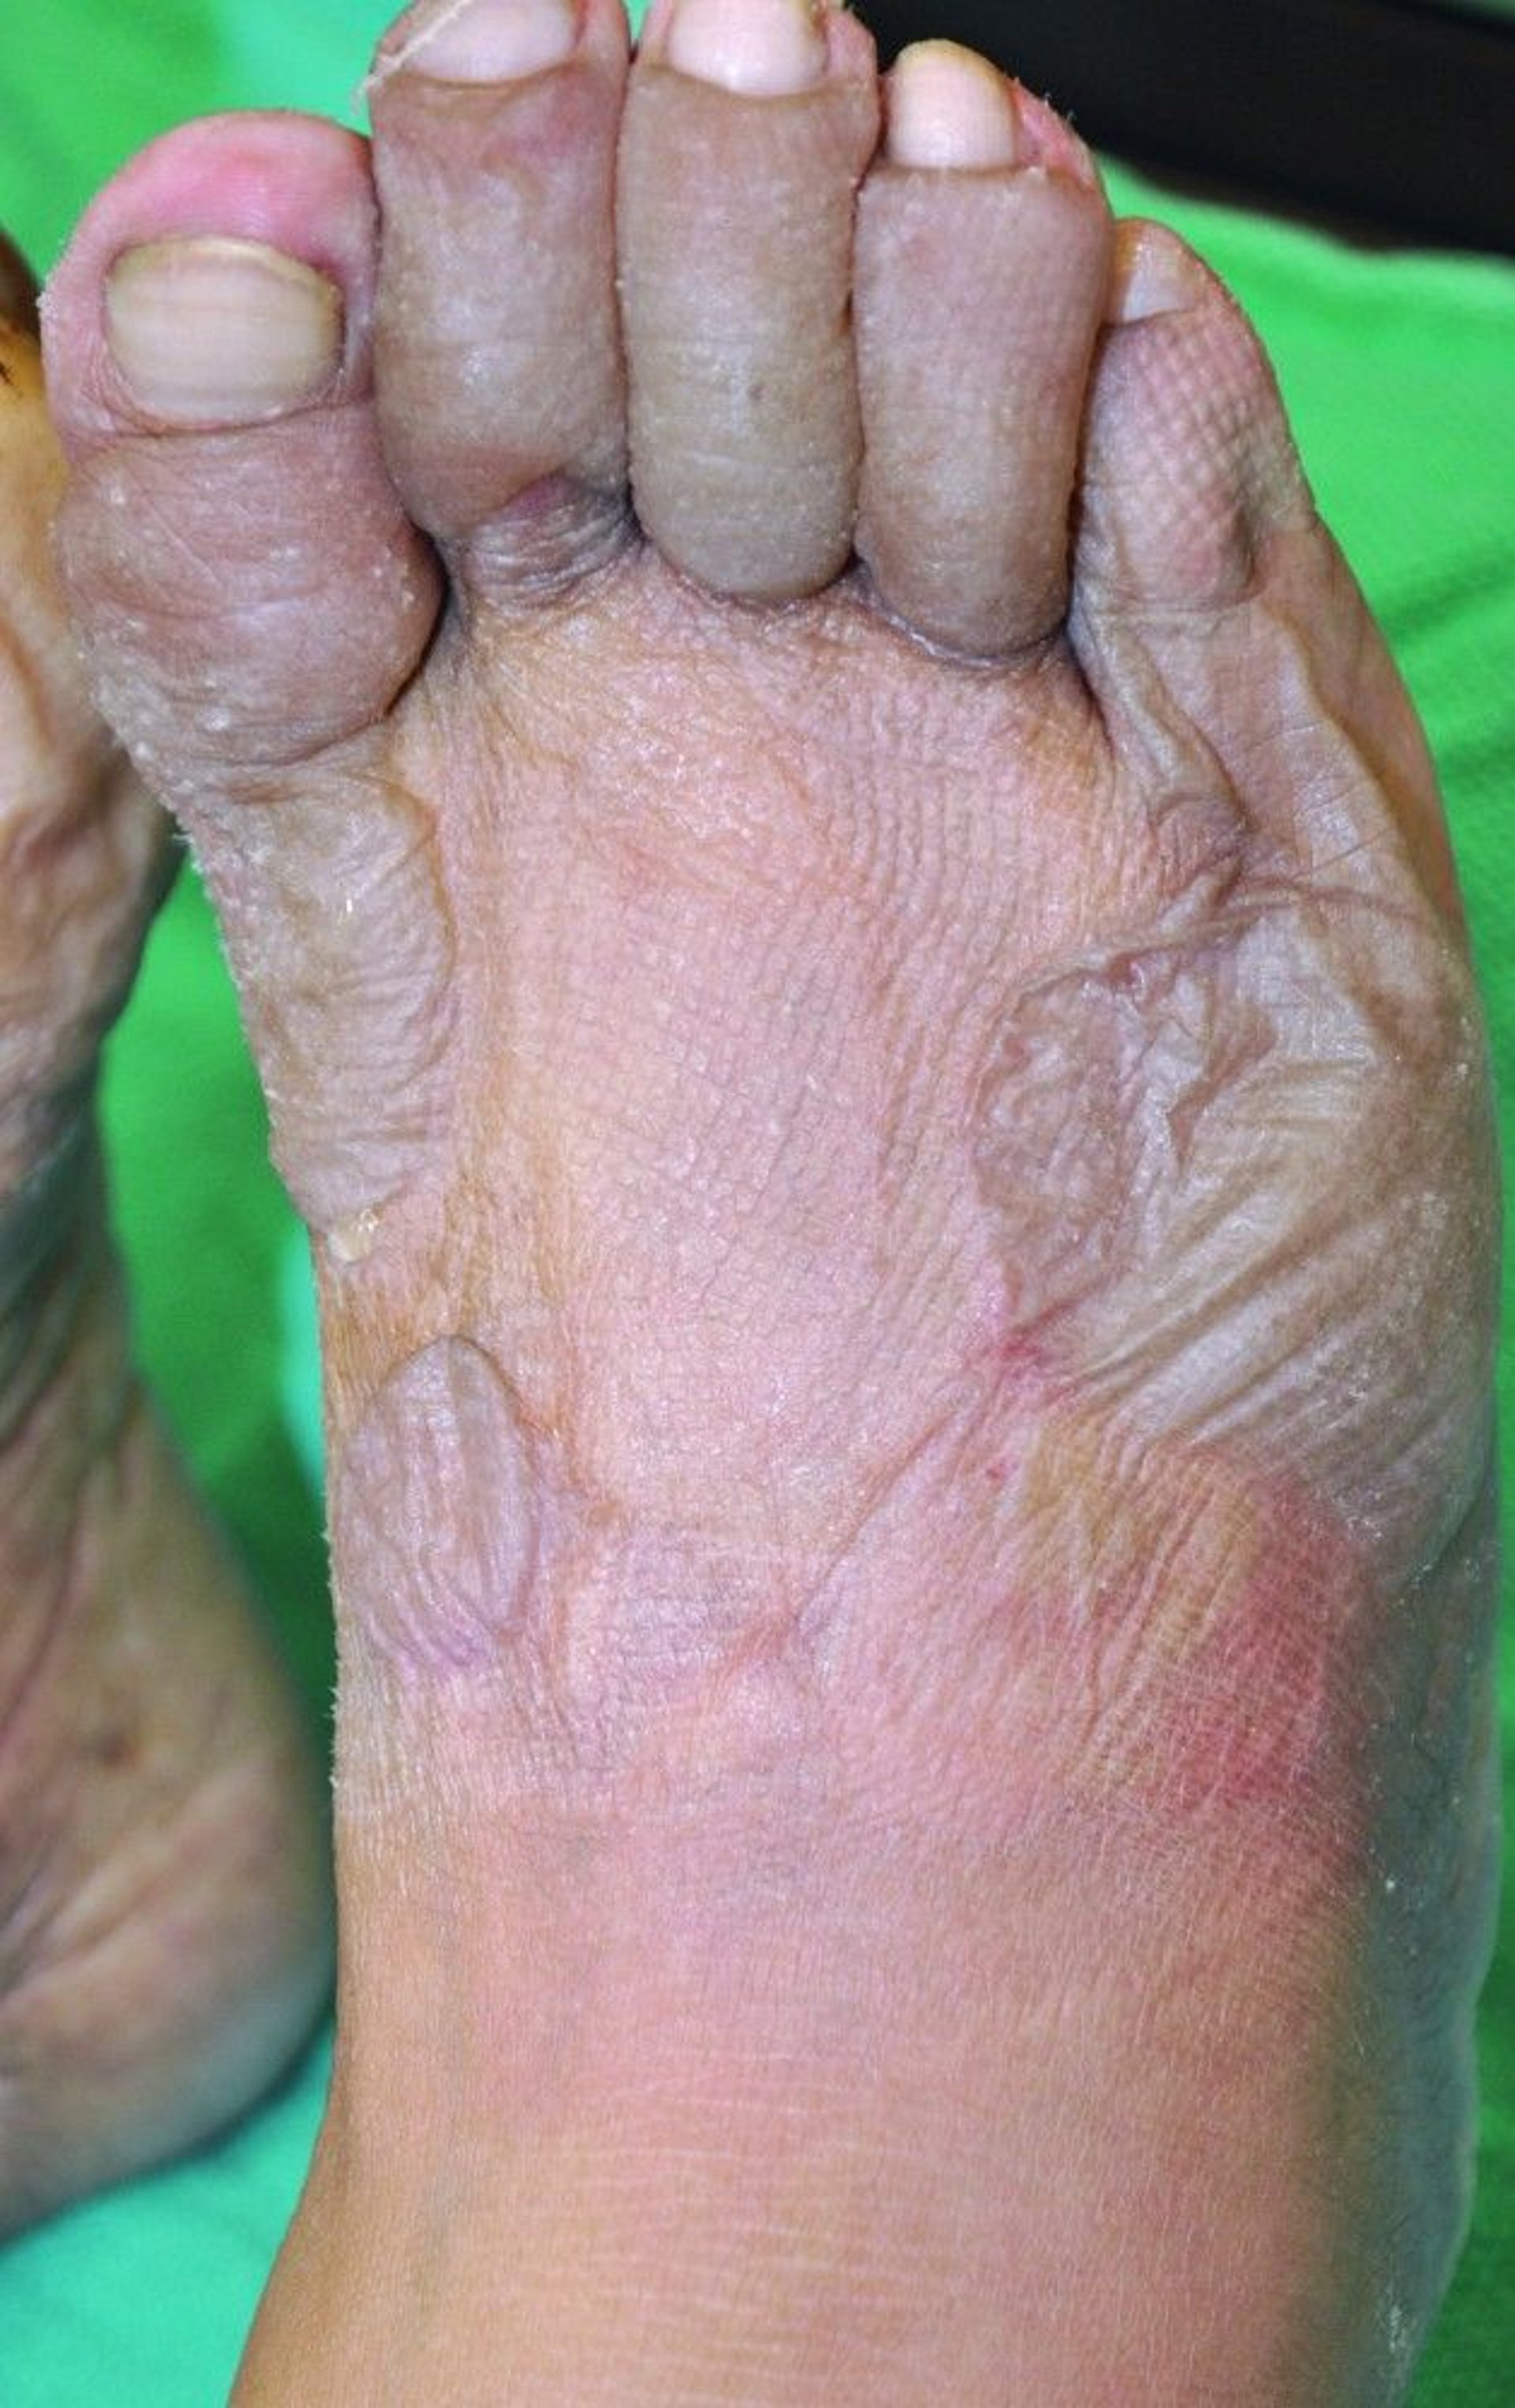 Frostbite of the Foot